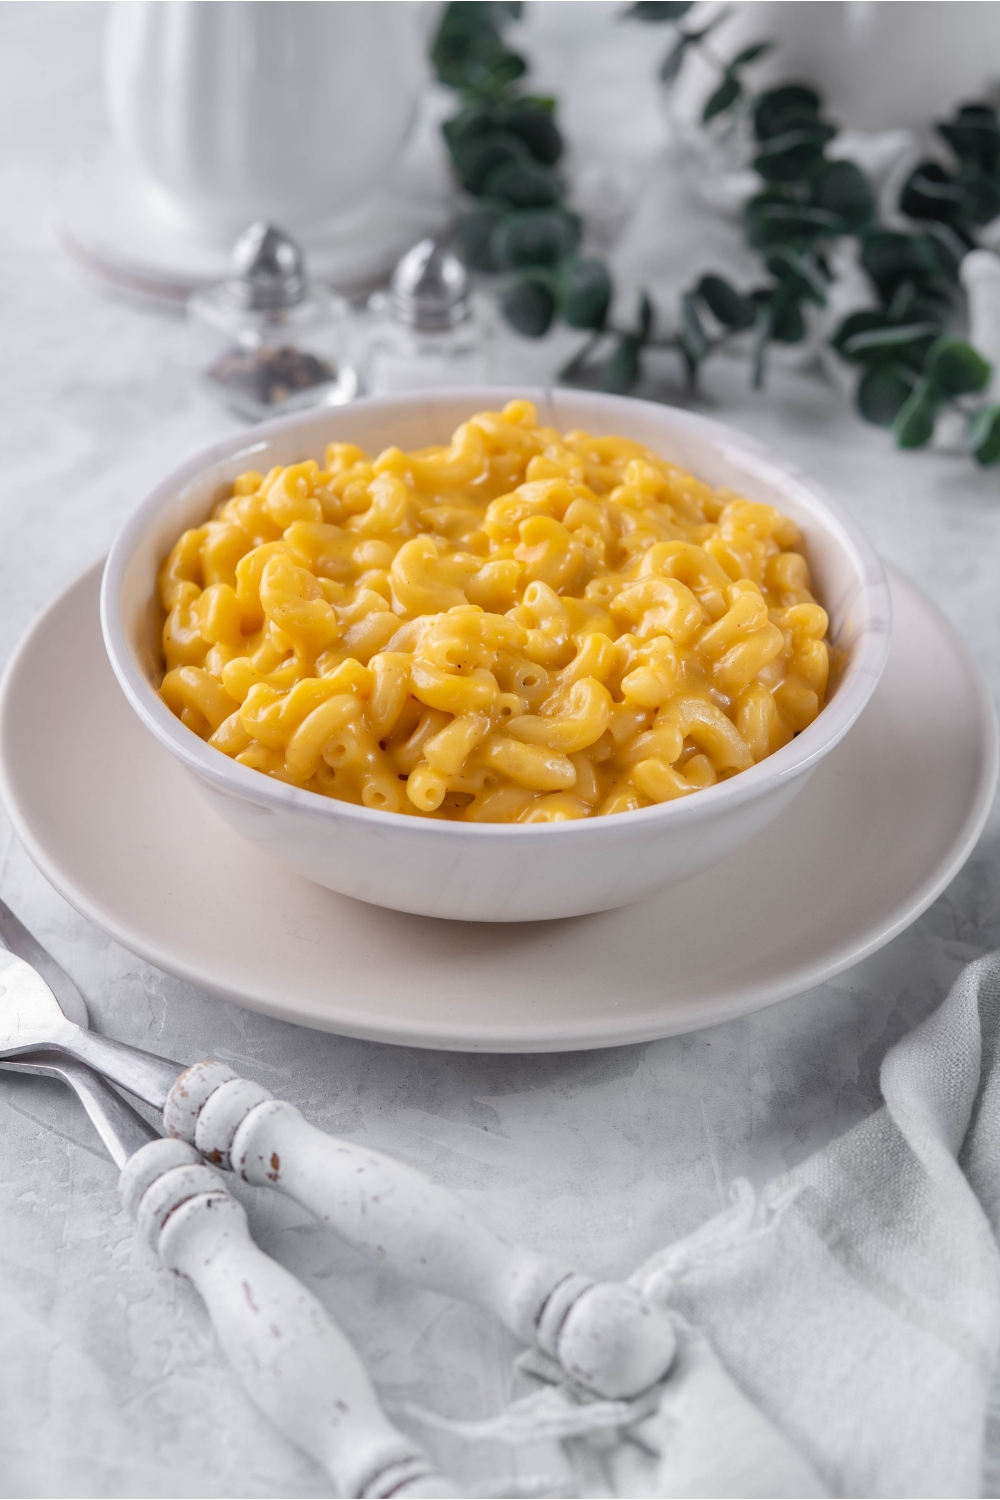 A bowl of creamy macaroni and cheese on a plate with two forks next to it.